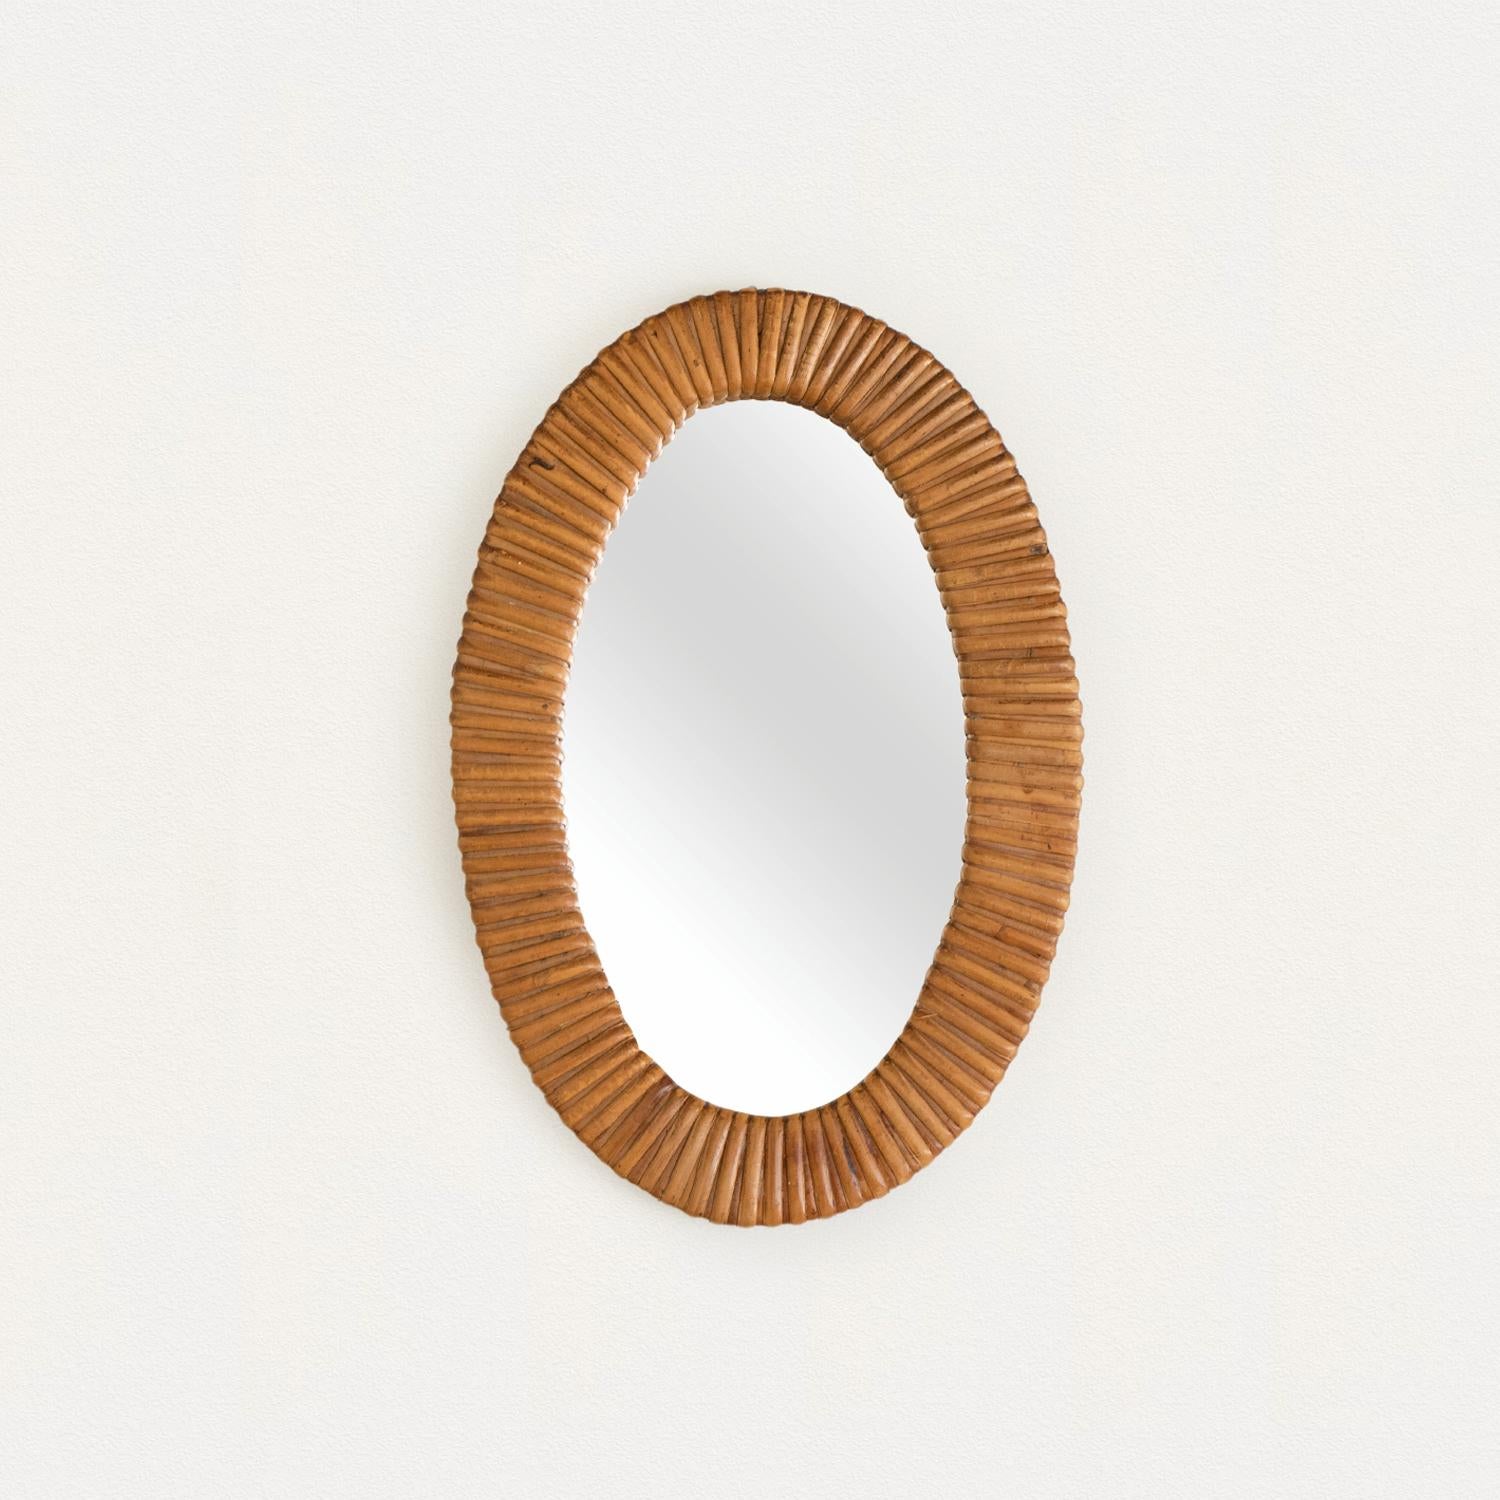 Small size rattan mirror in an oval shape with wrapped rattan encompassing the mirror. Nice vintage condition with original mirror. From France, 1960's.